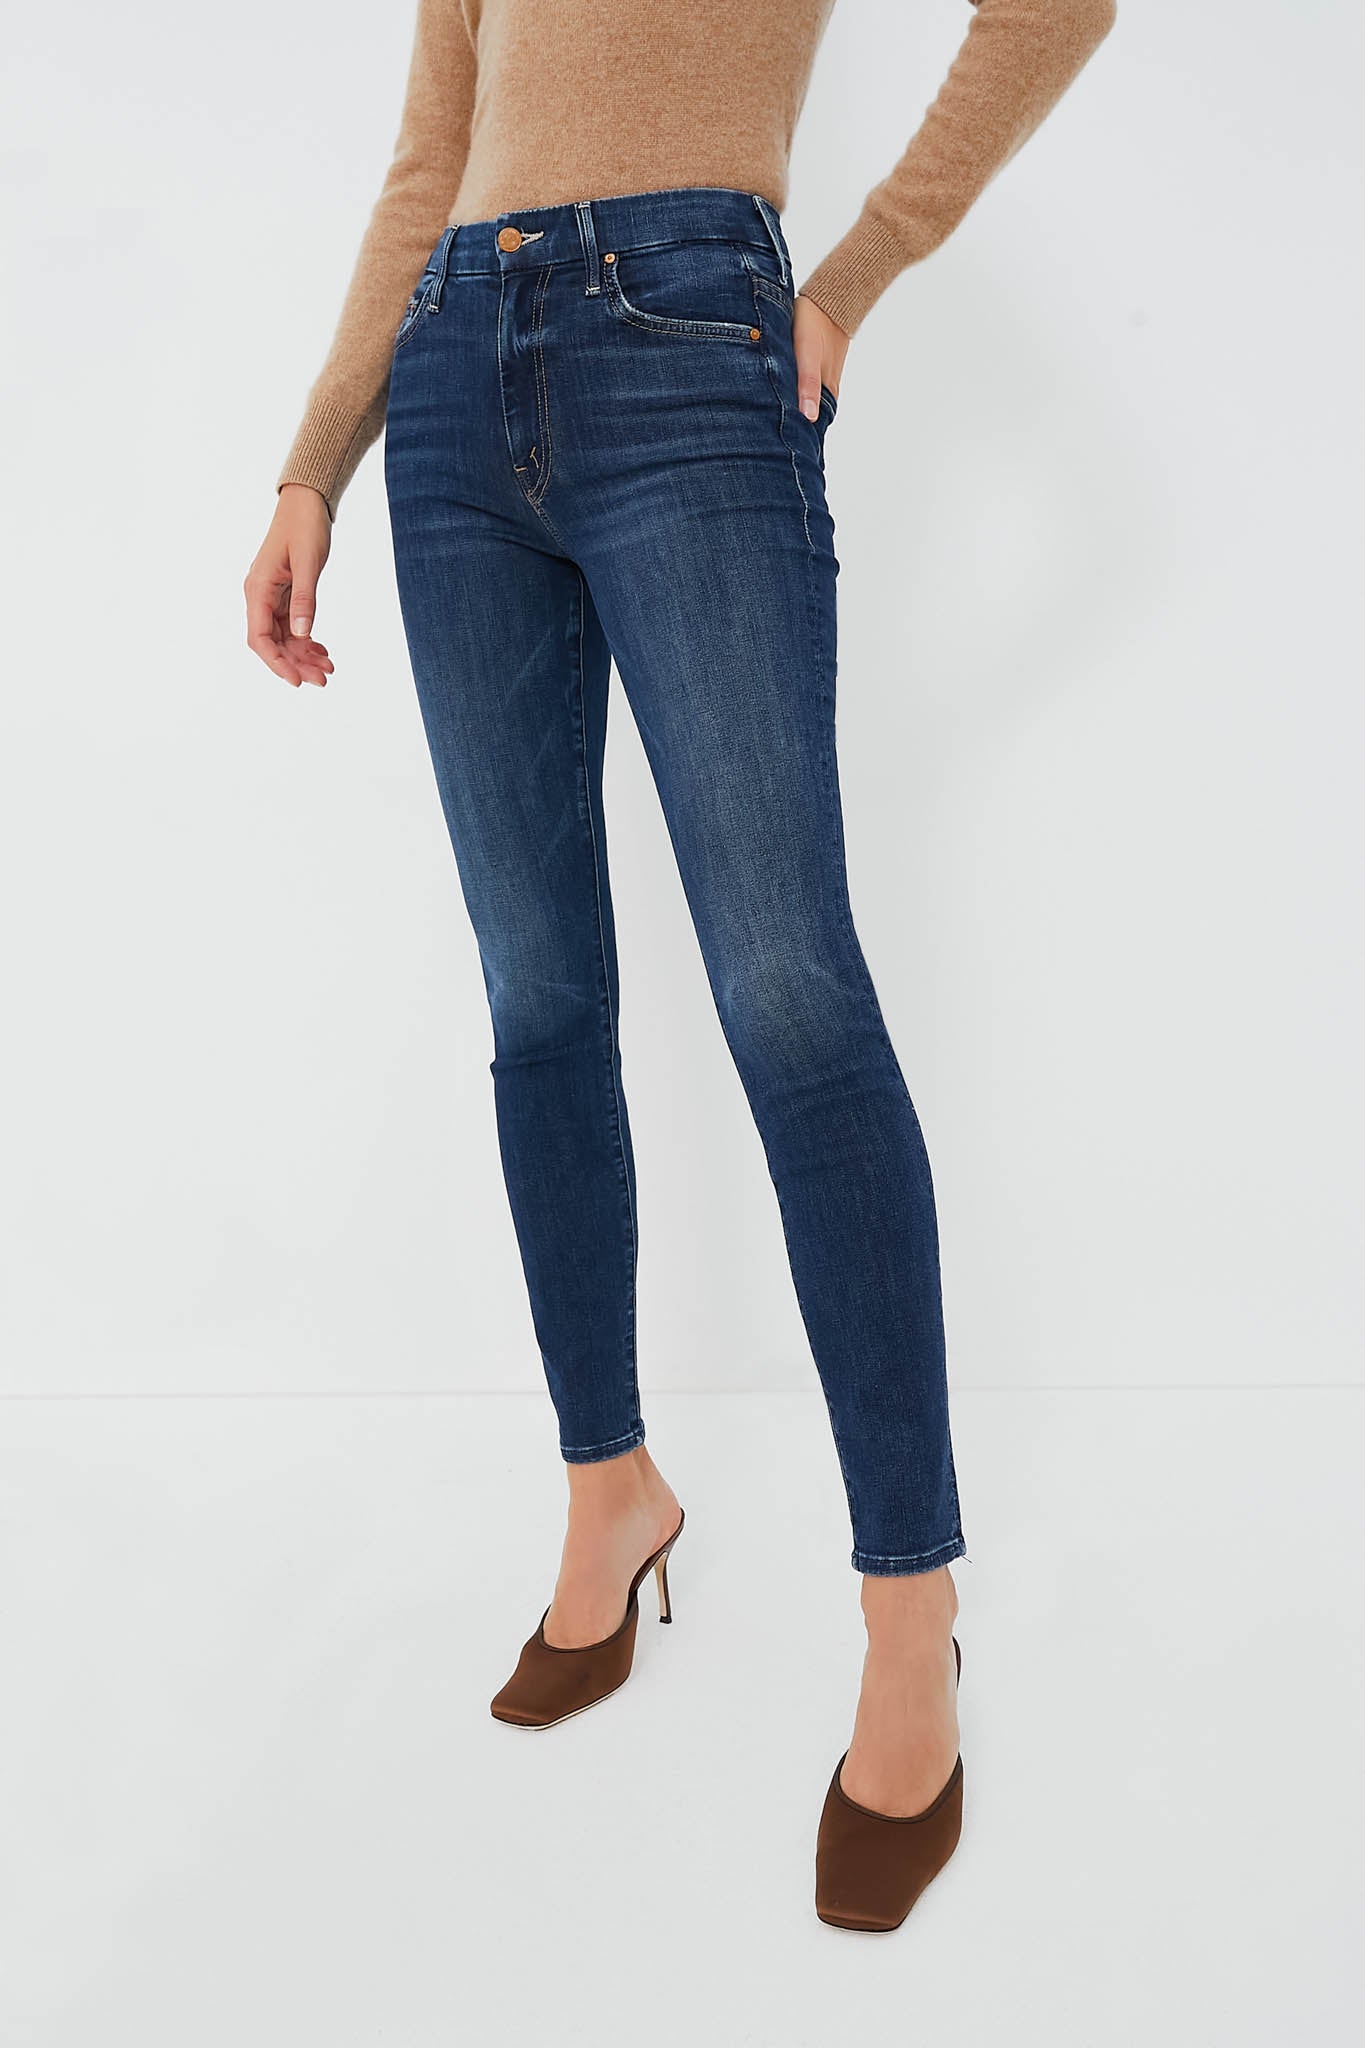 Skinny Very Stretchy High Rise Dark Wash Gap Proof Jeans BloomChic